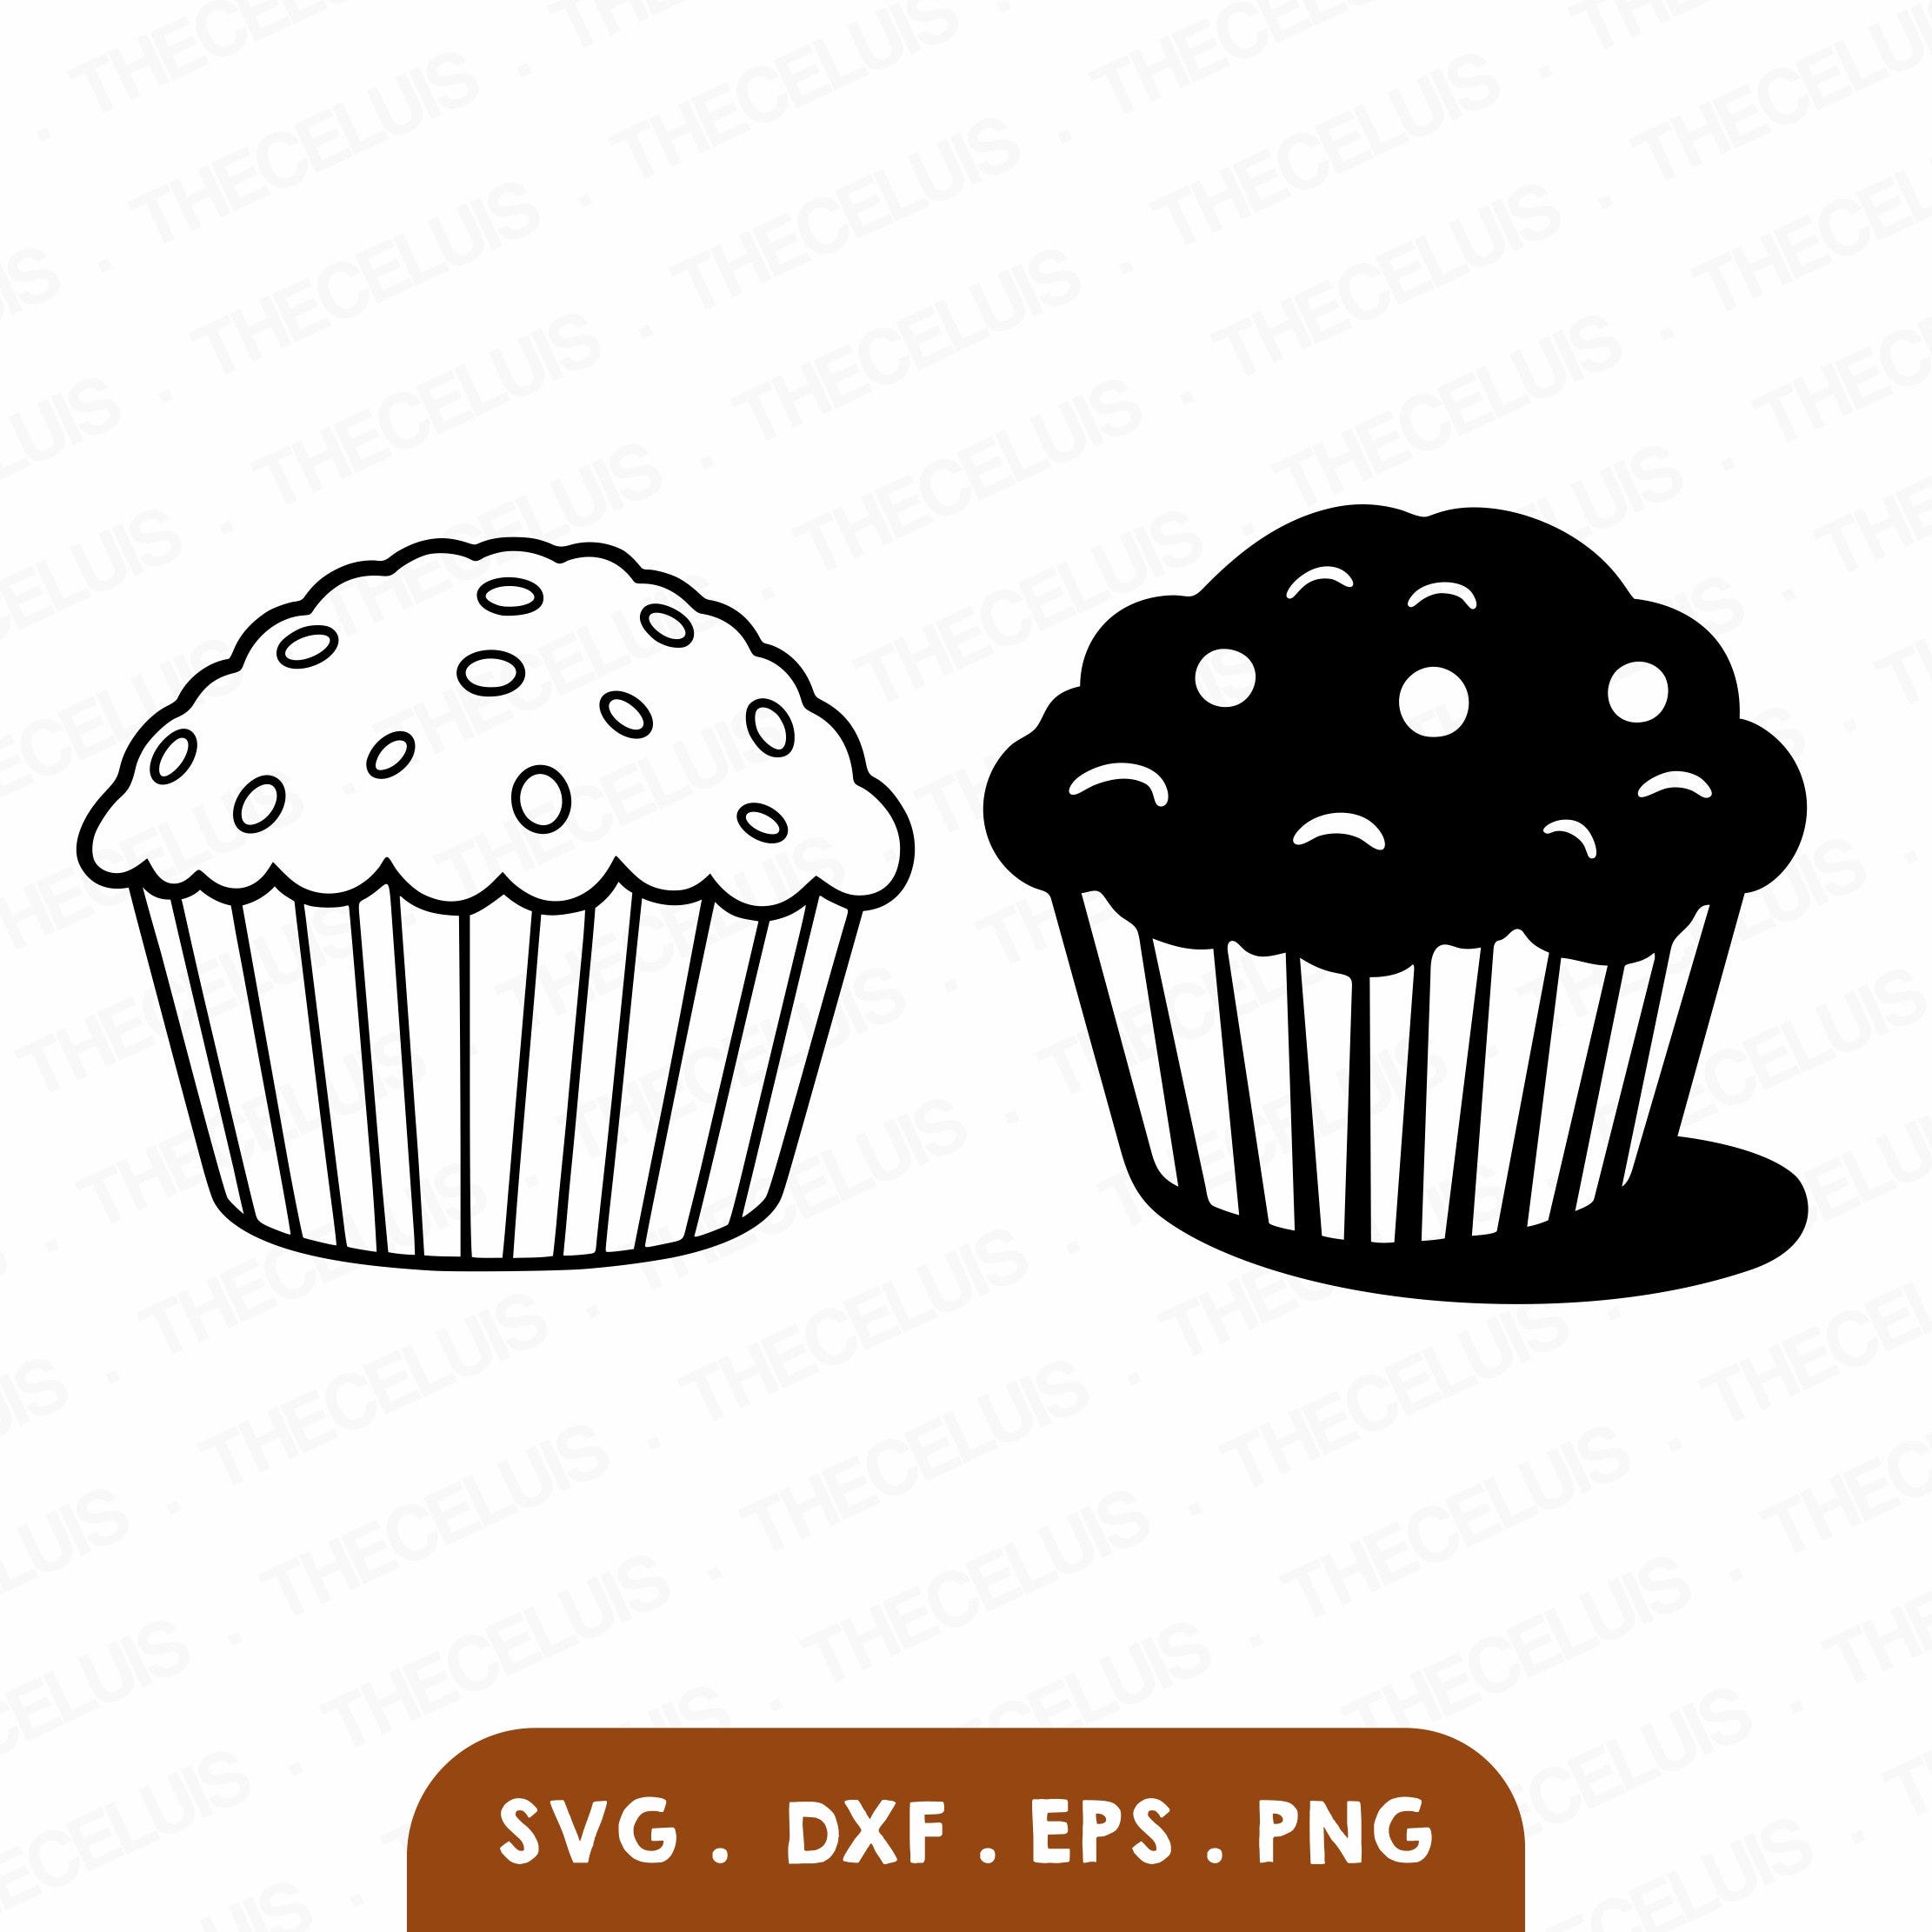 MUFFIN Svg, Dxf, Eps, Png File - Vinyl Cutting File, Food Clipart, Baking Digital File, Cricut, Silhouette Cameo, Instant Download